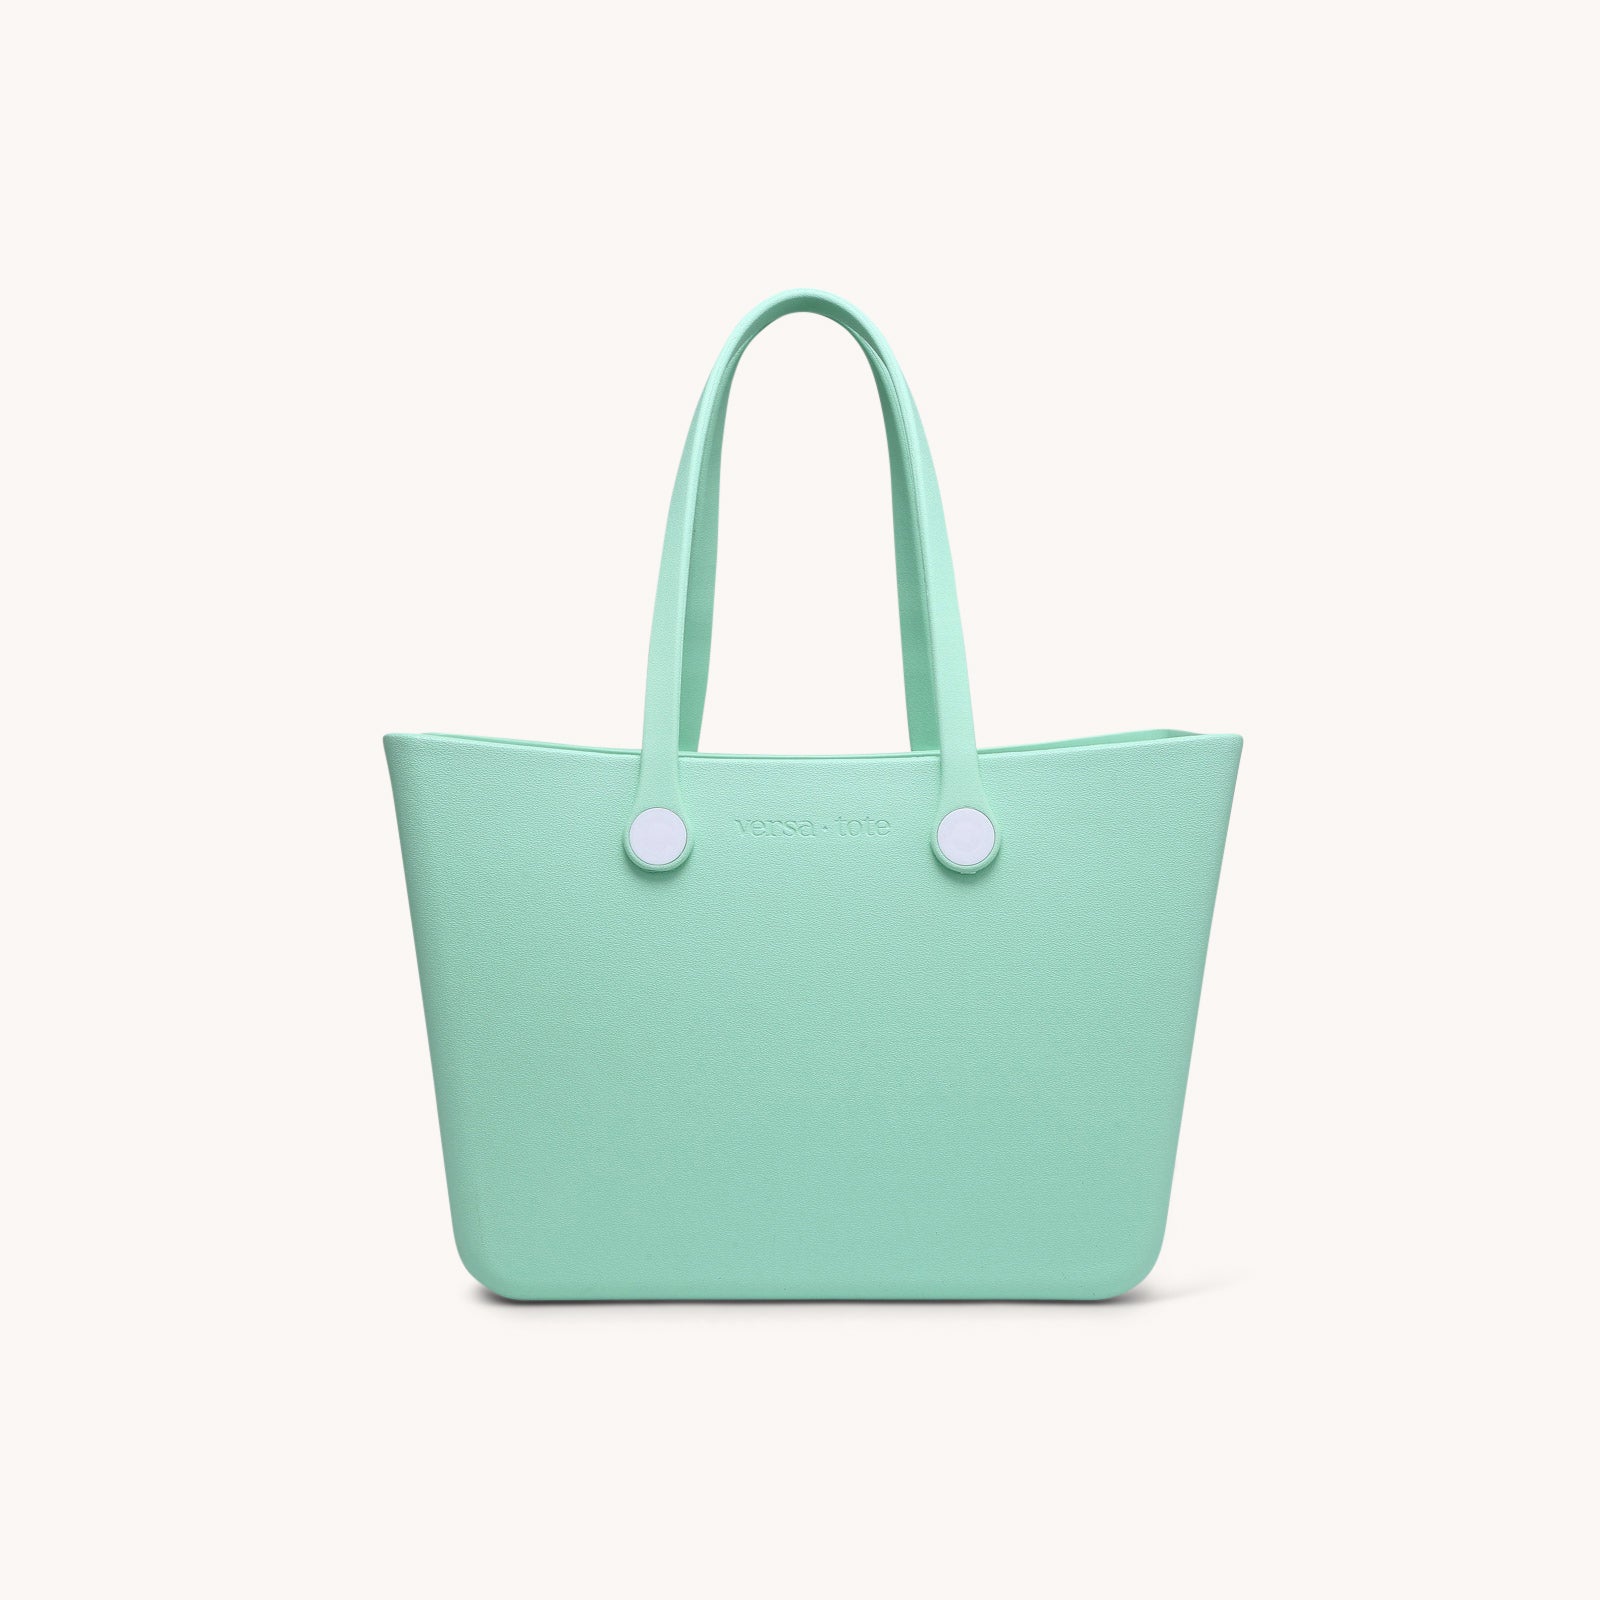 Versa-Tote: Carry Your World in Style – versa-tote